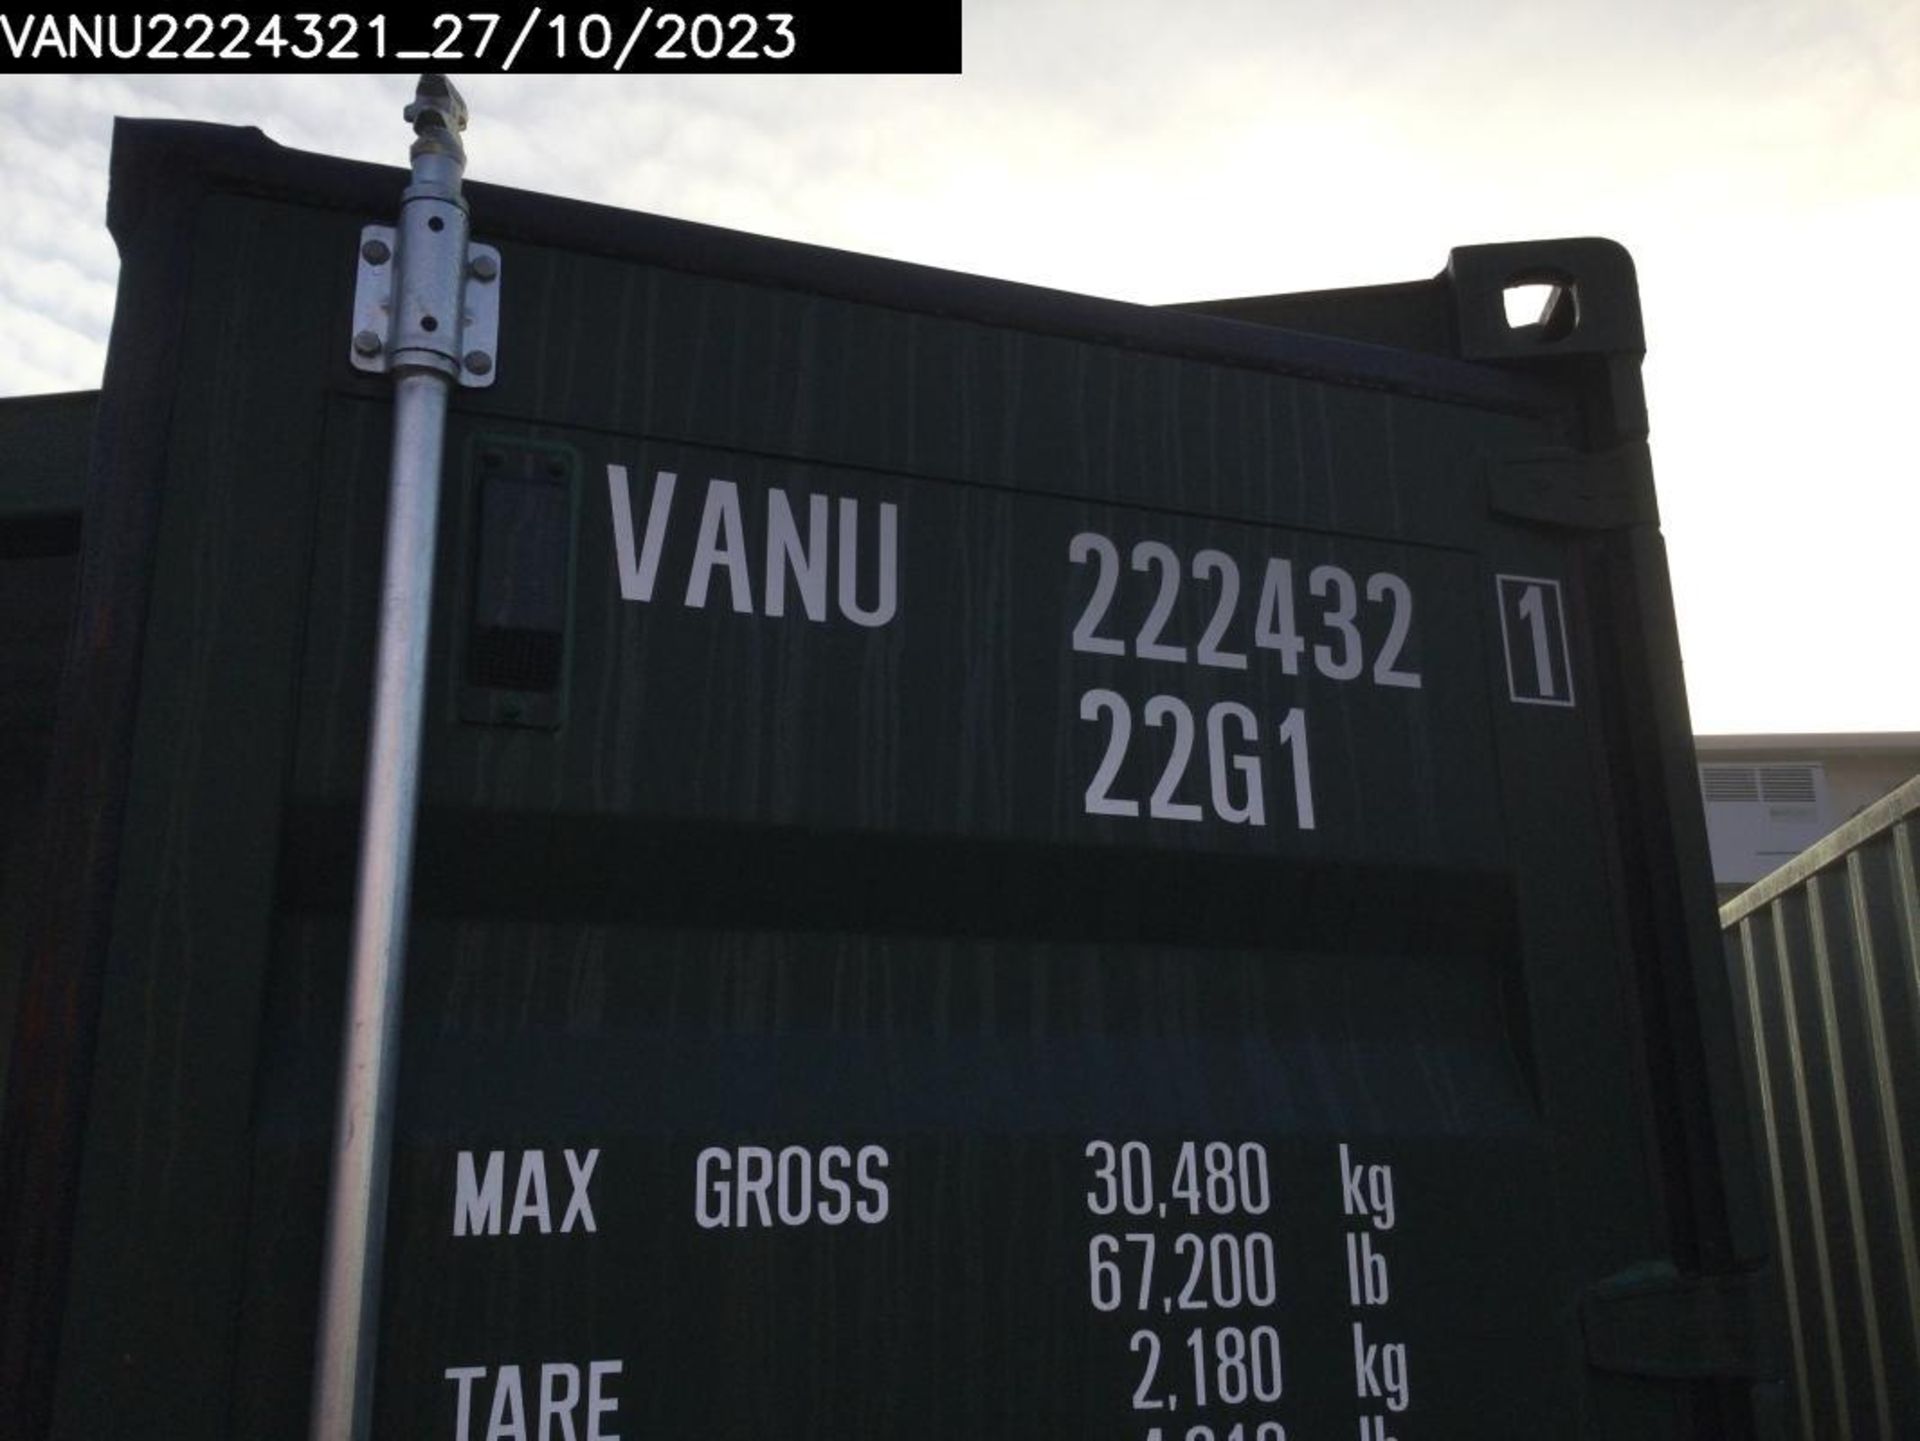 One Trip 20ft Shipping Container - Unit Number – VANU2224321 - Image 2 of 7